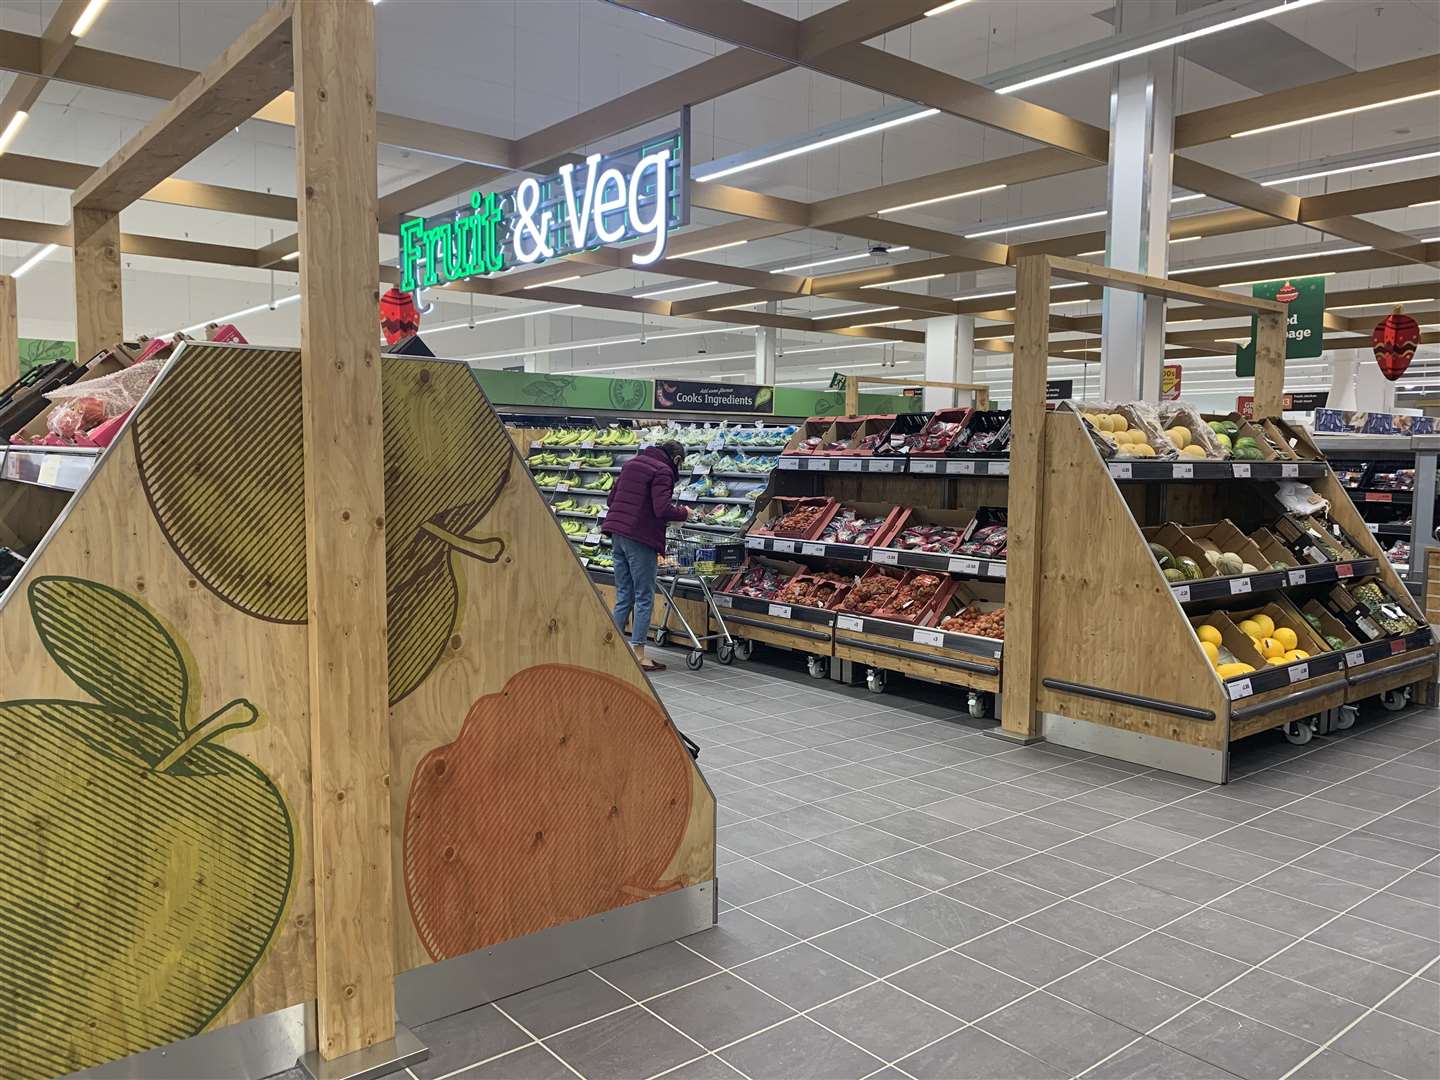 The Fresh Food Market layout is the first of its kind in the country which Sainsbury's says could be rolled out across its 1,400 stores